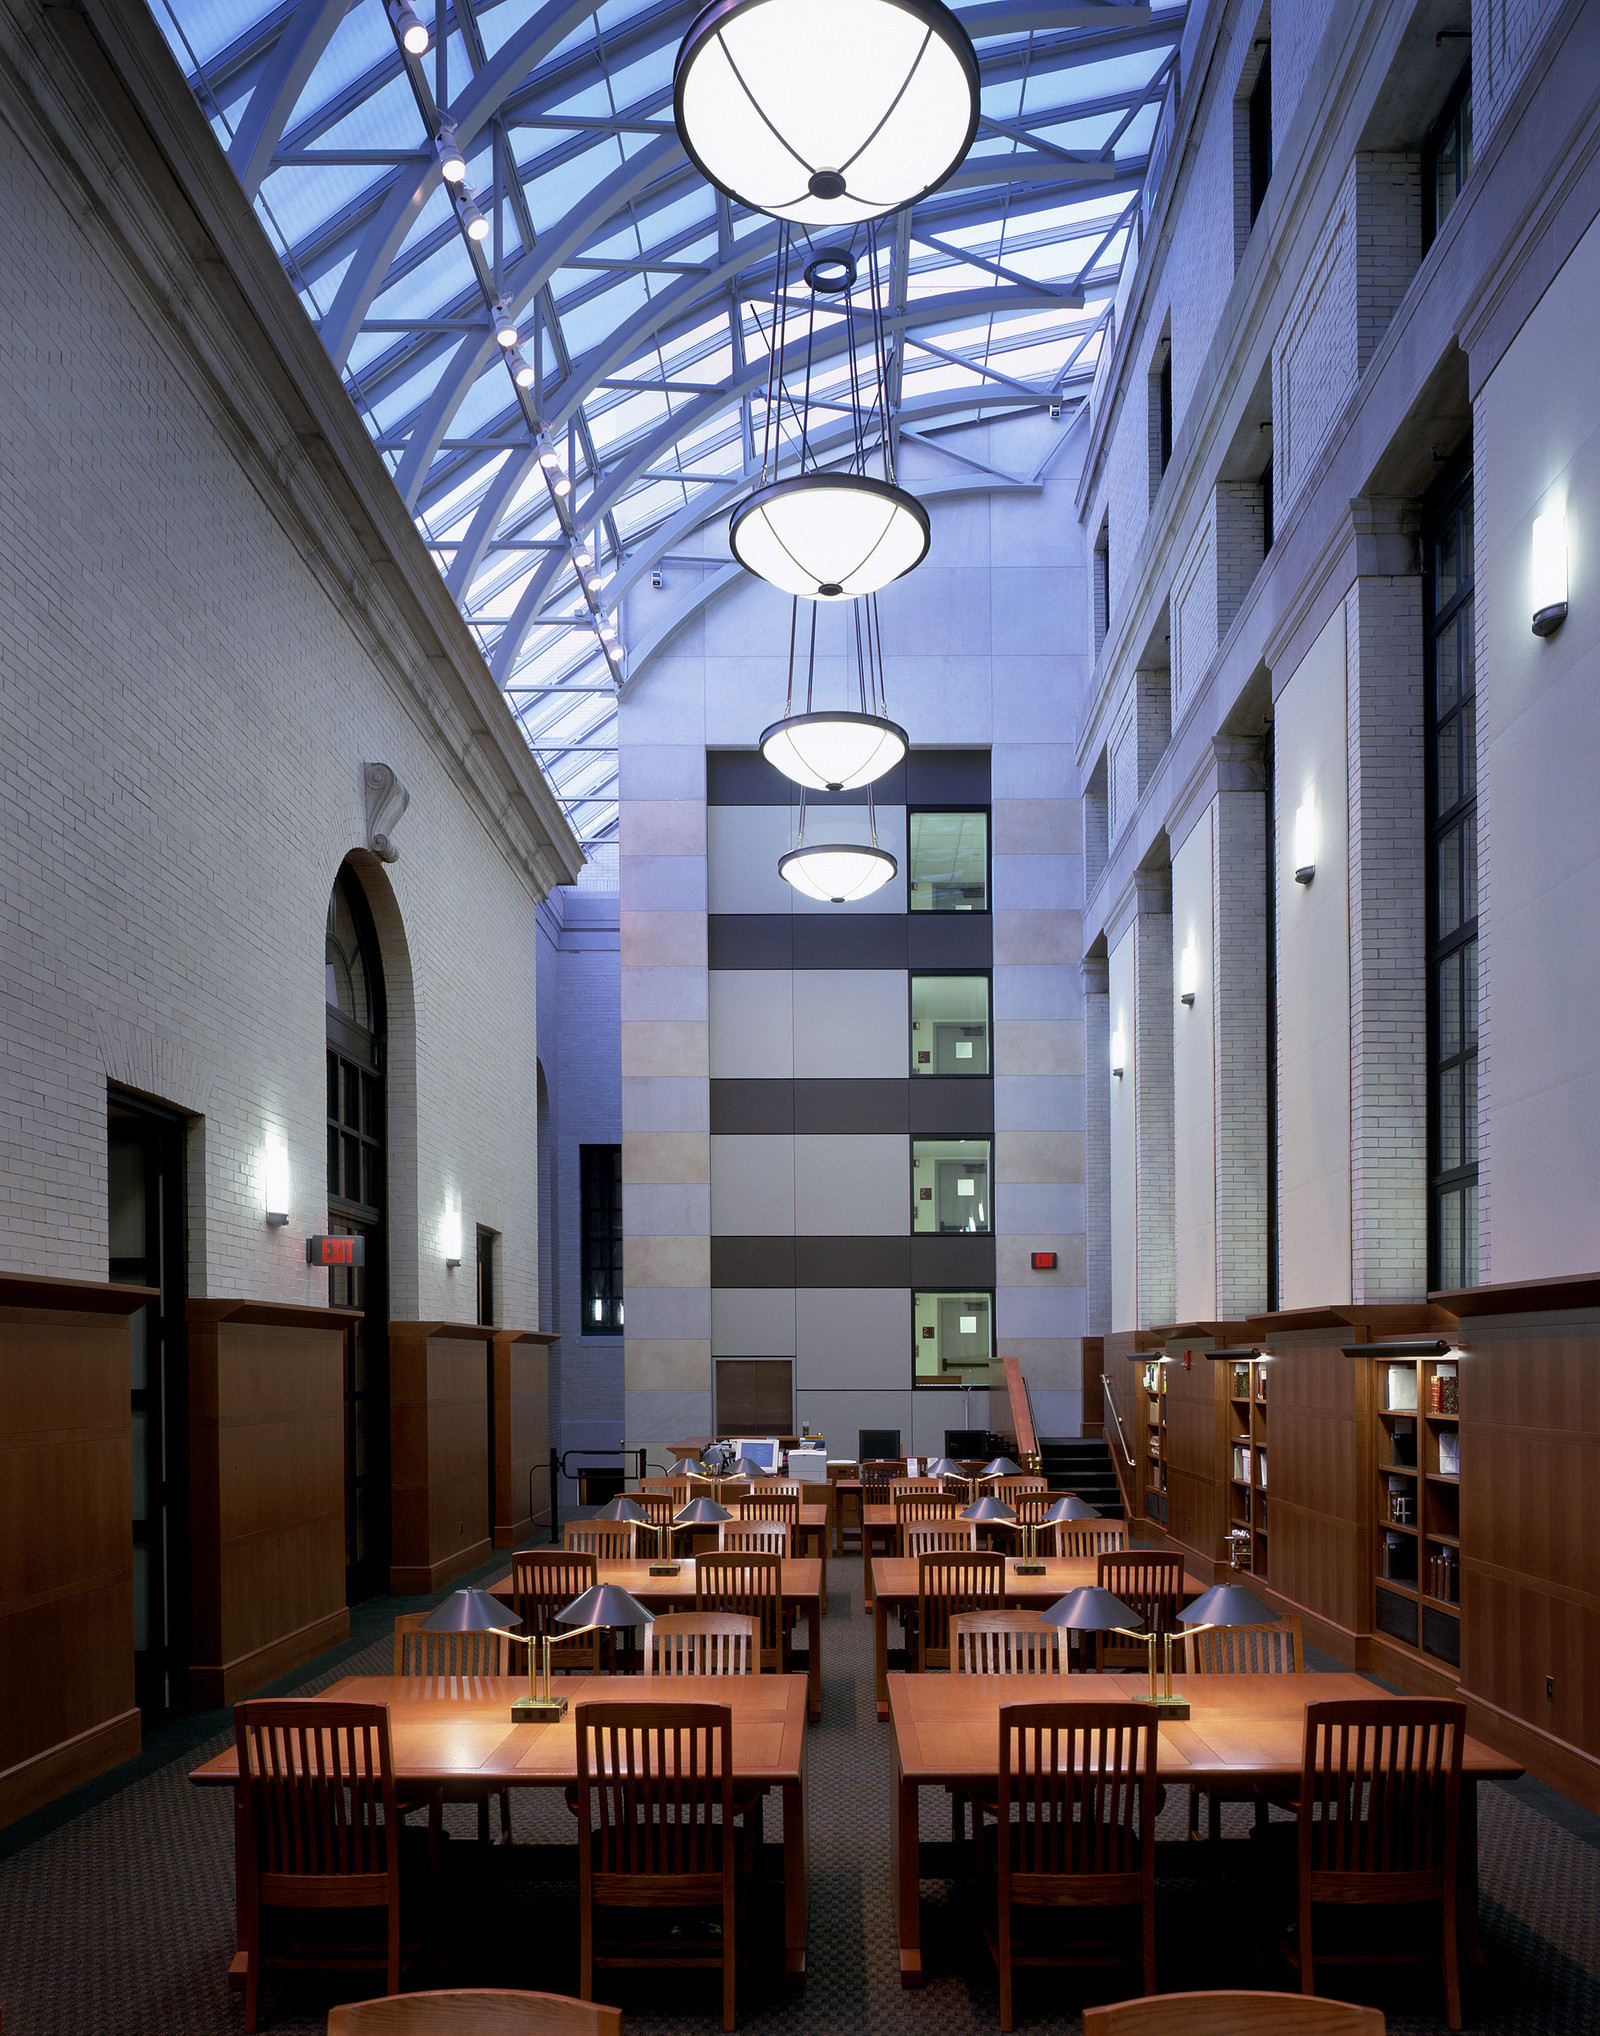 Another view of the study tables at Widener Library, Harvard University